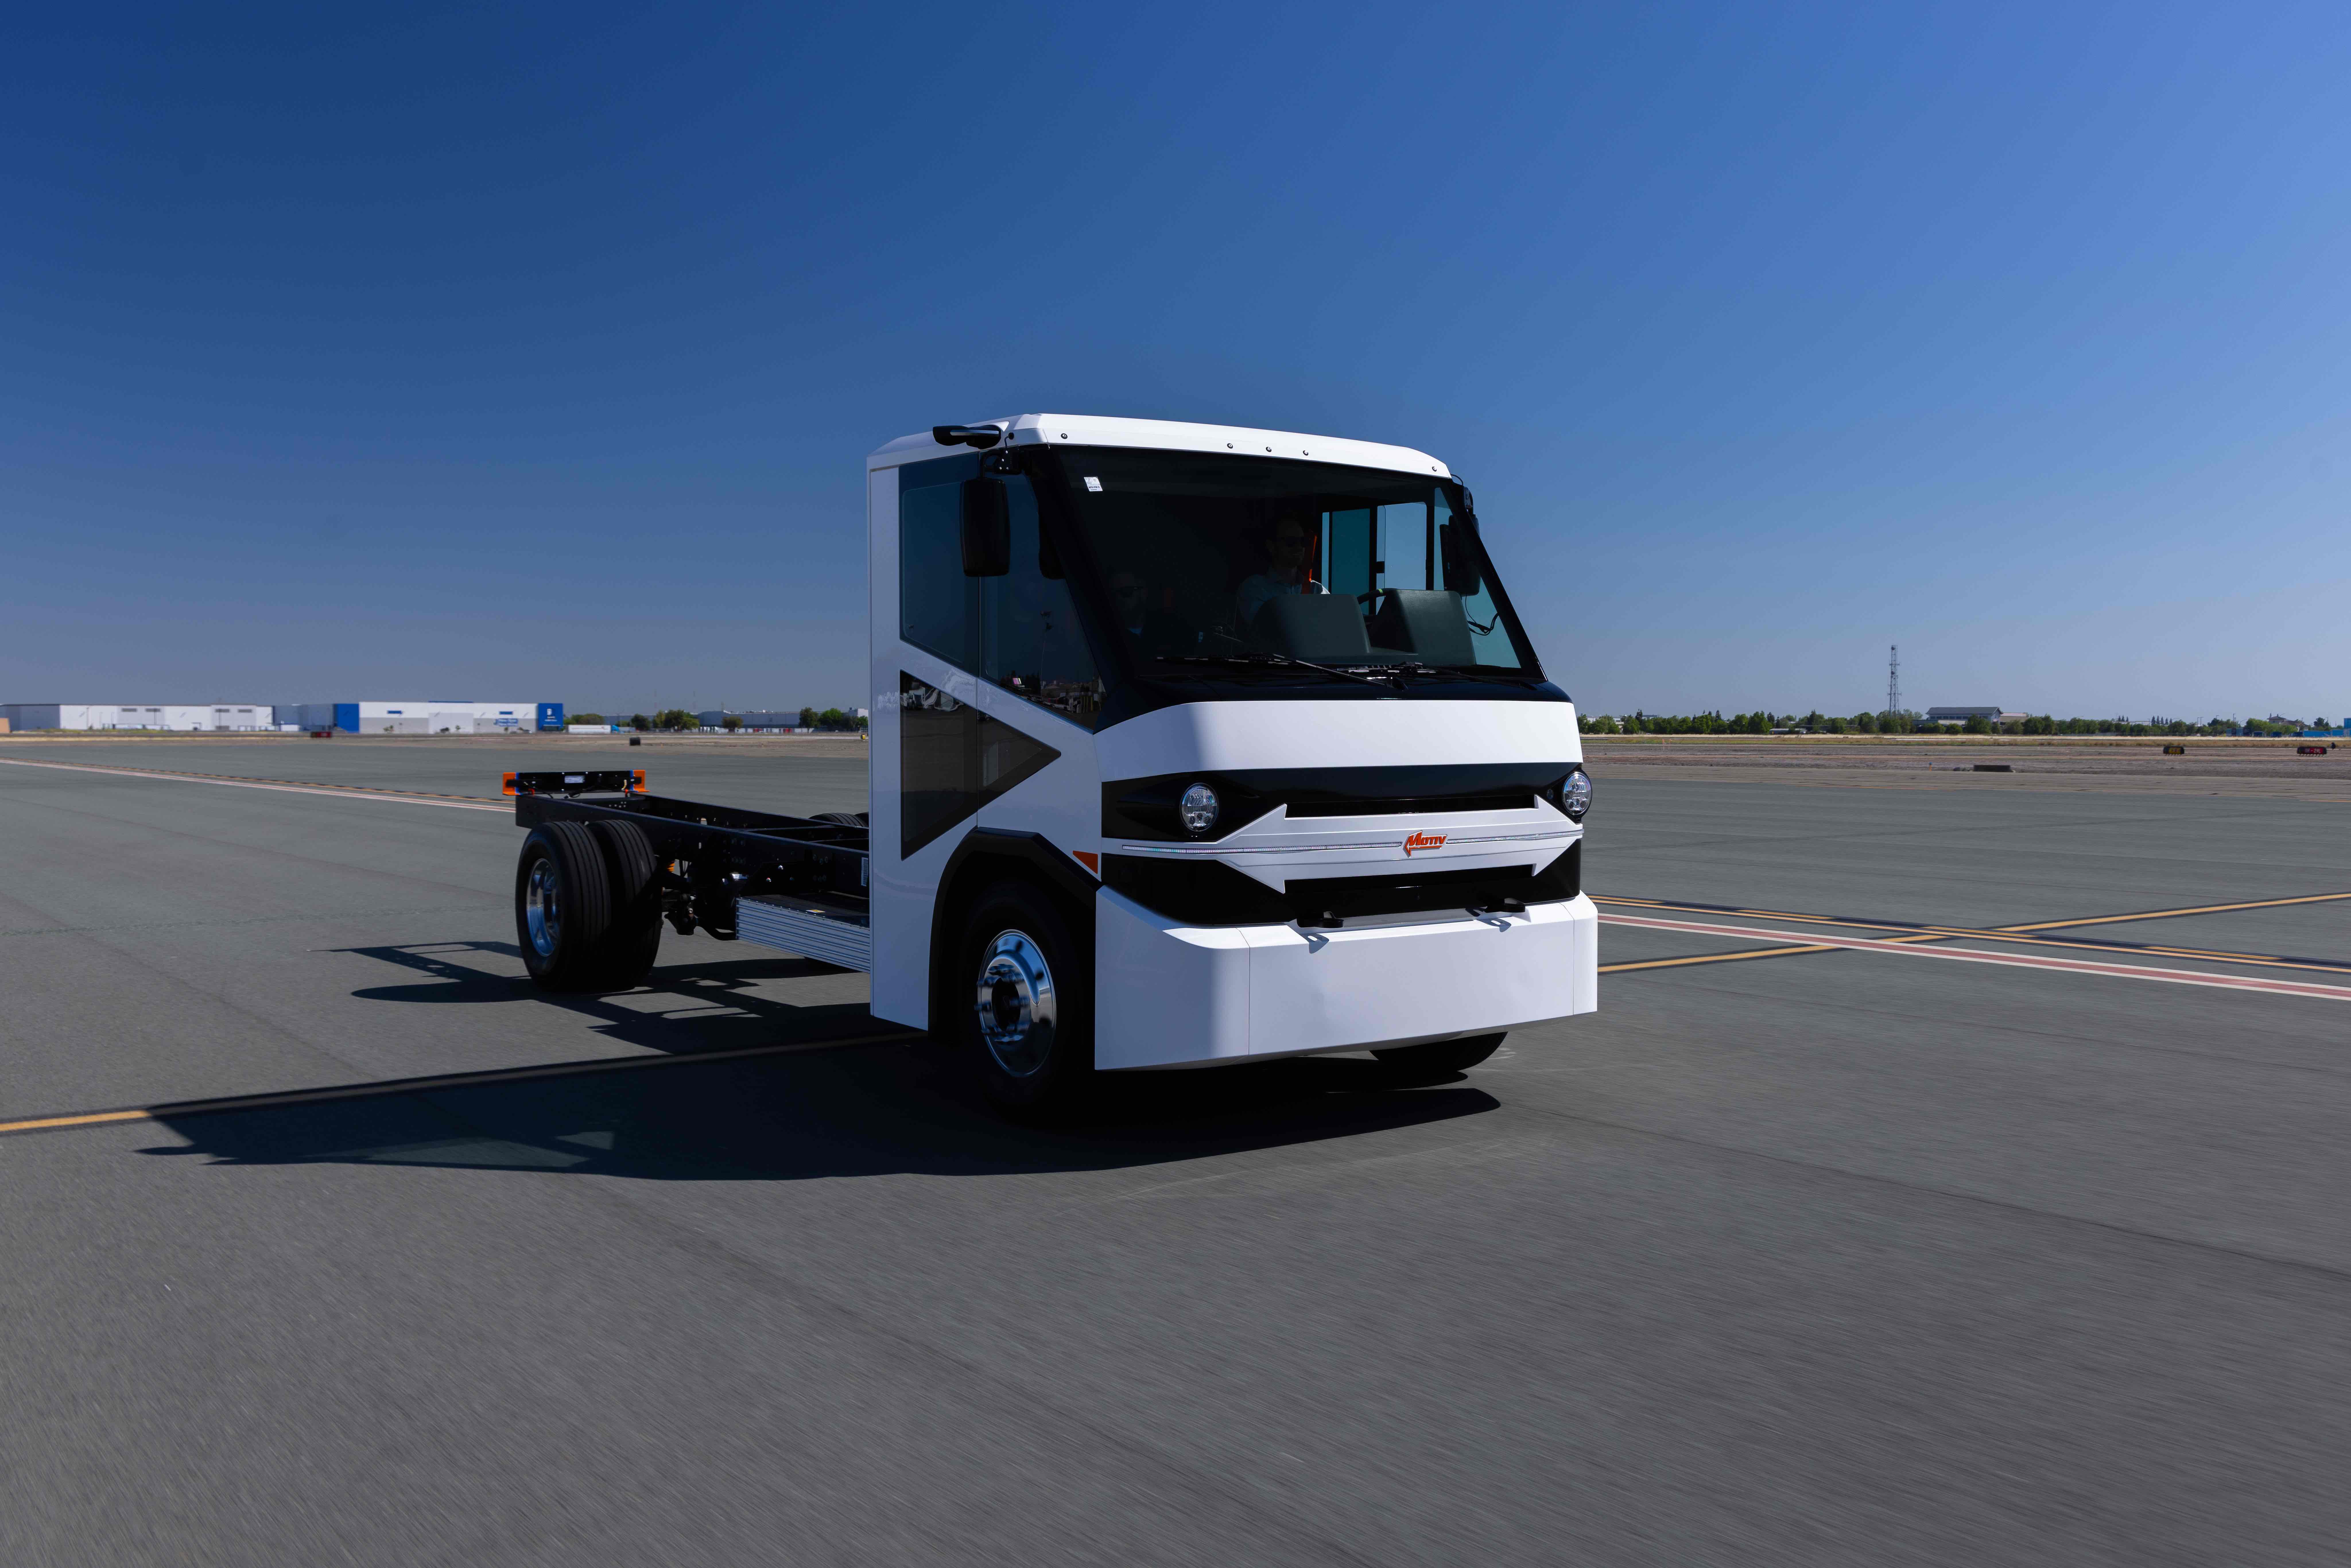 Motiv Electric Trucks ran its new Argo truck through its paces at the Stockton Metropolitan Airport before launching it at the ACT Expo in Las Vegas.